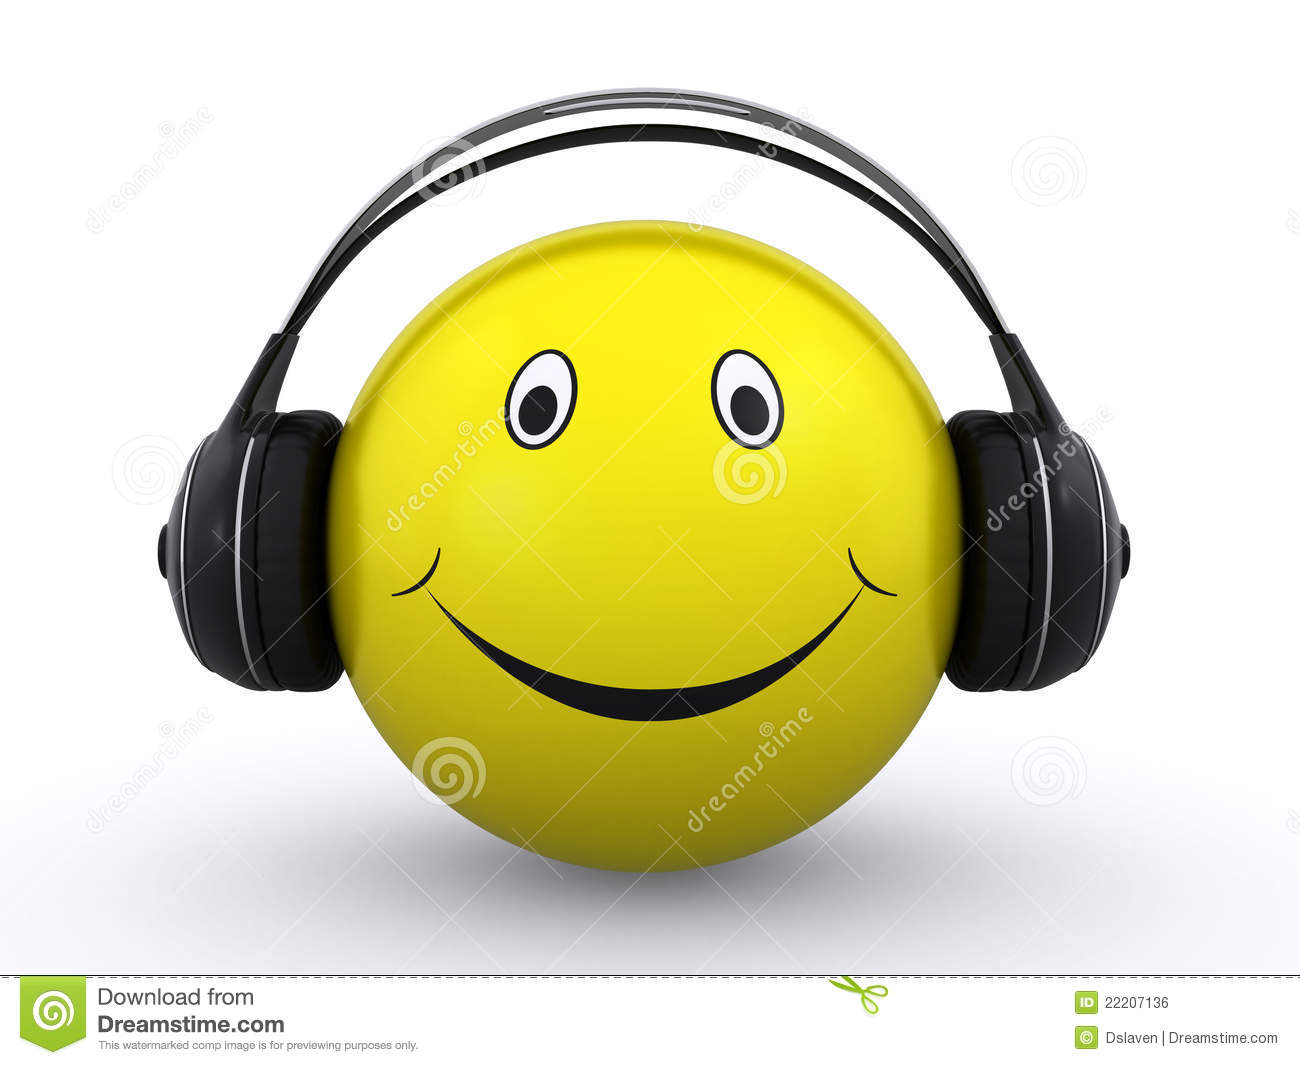 Smiley Face with Headphones